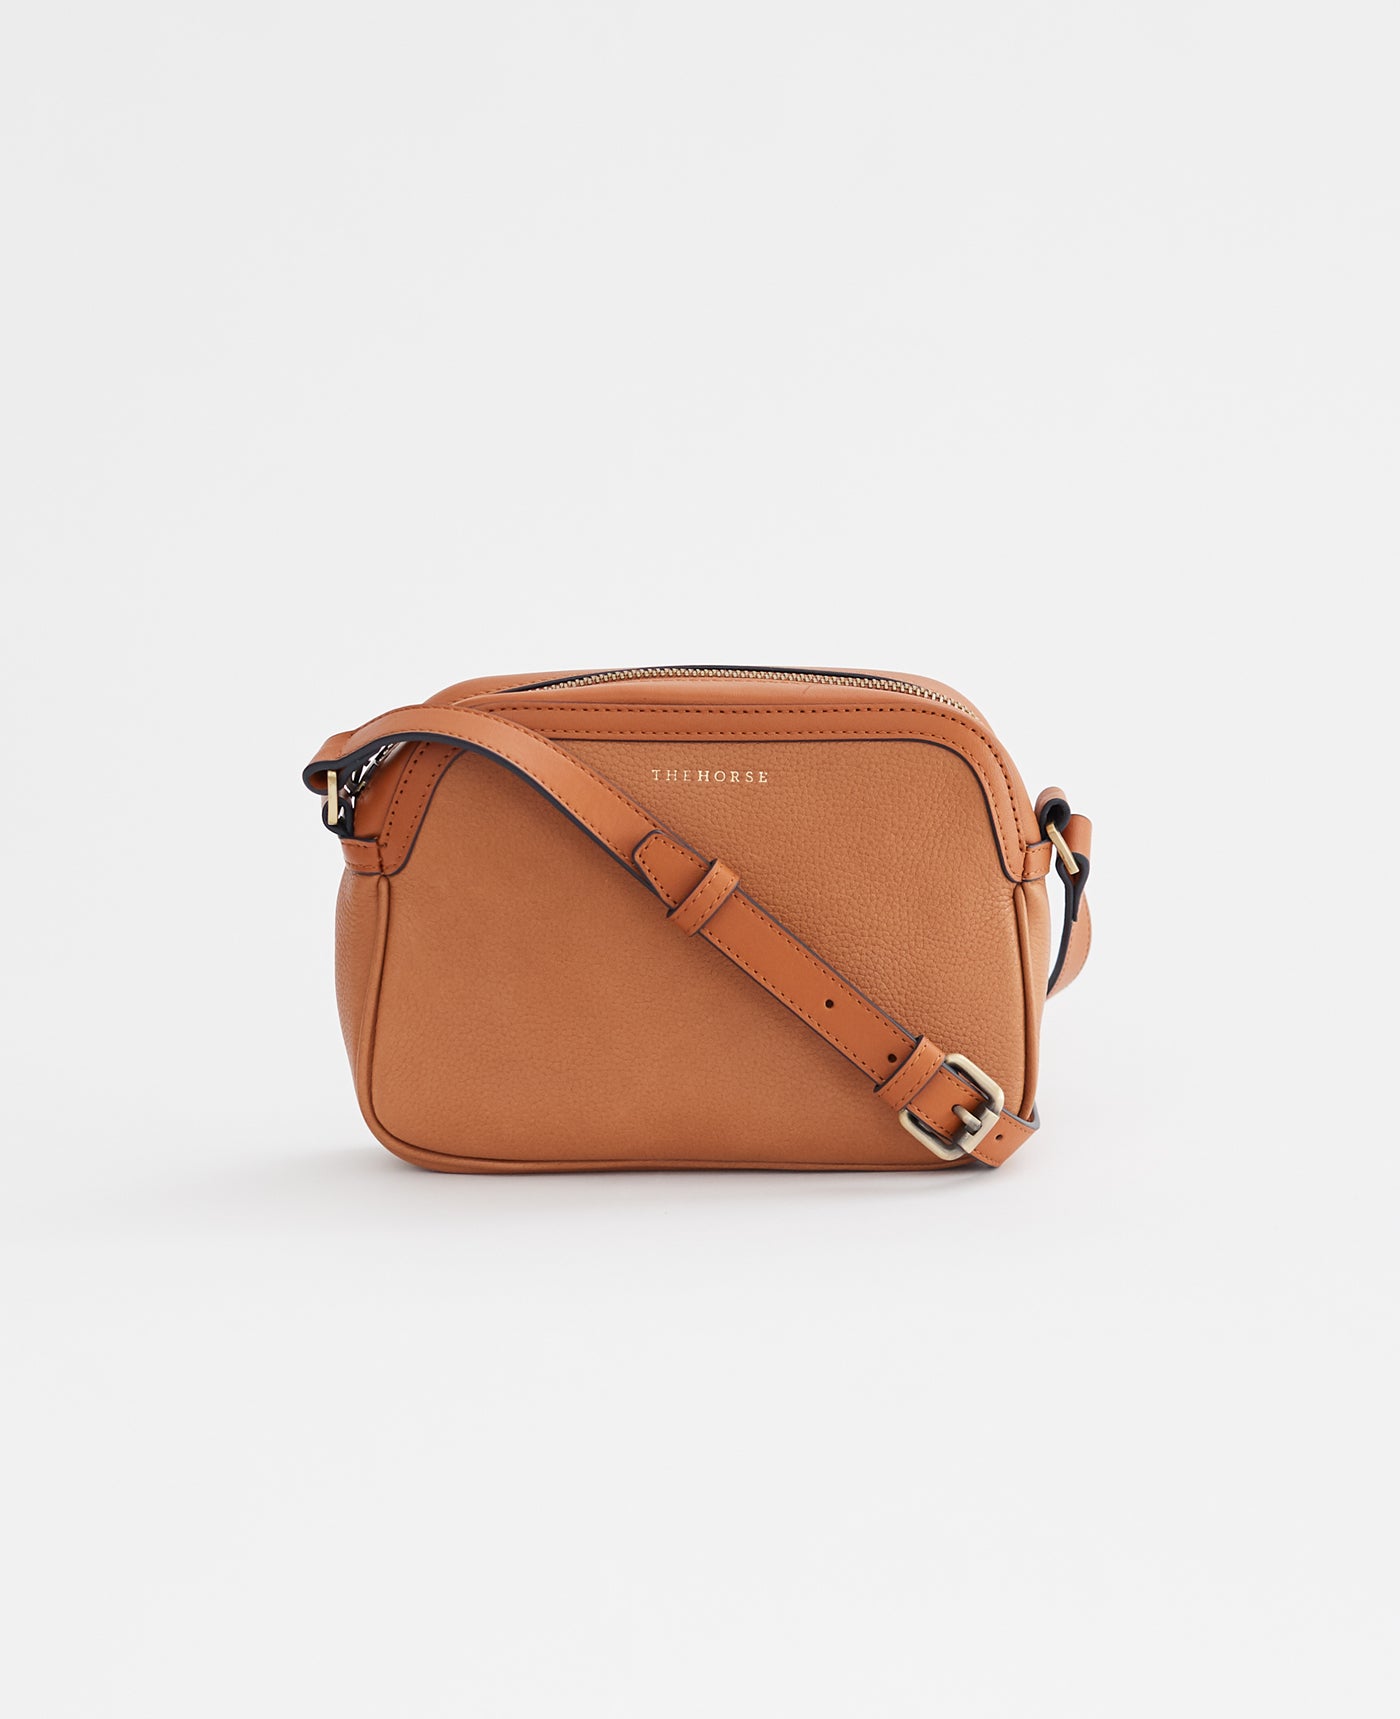 The Ninny Leather Bag in Tan by The Horse